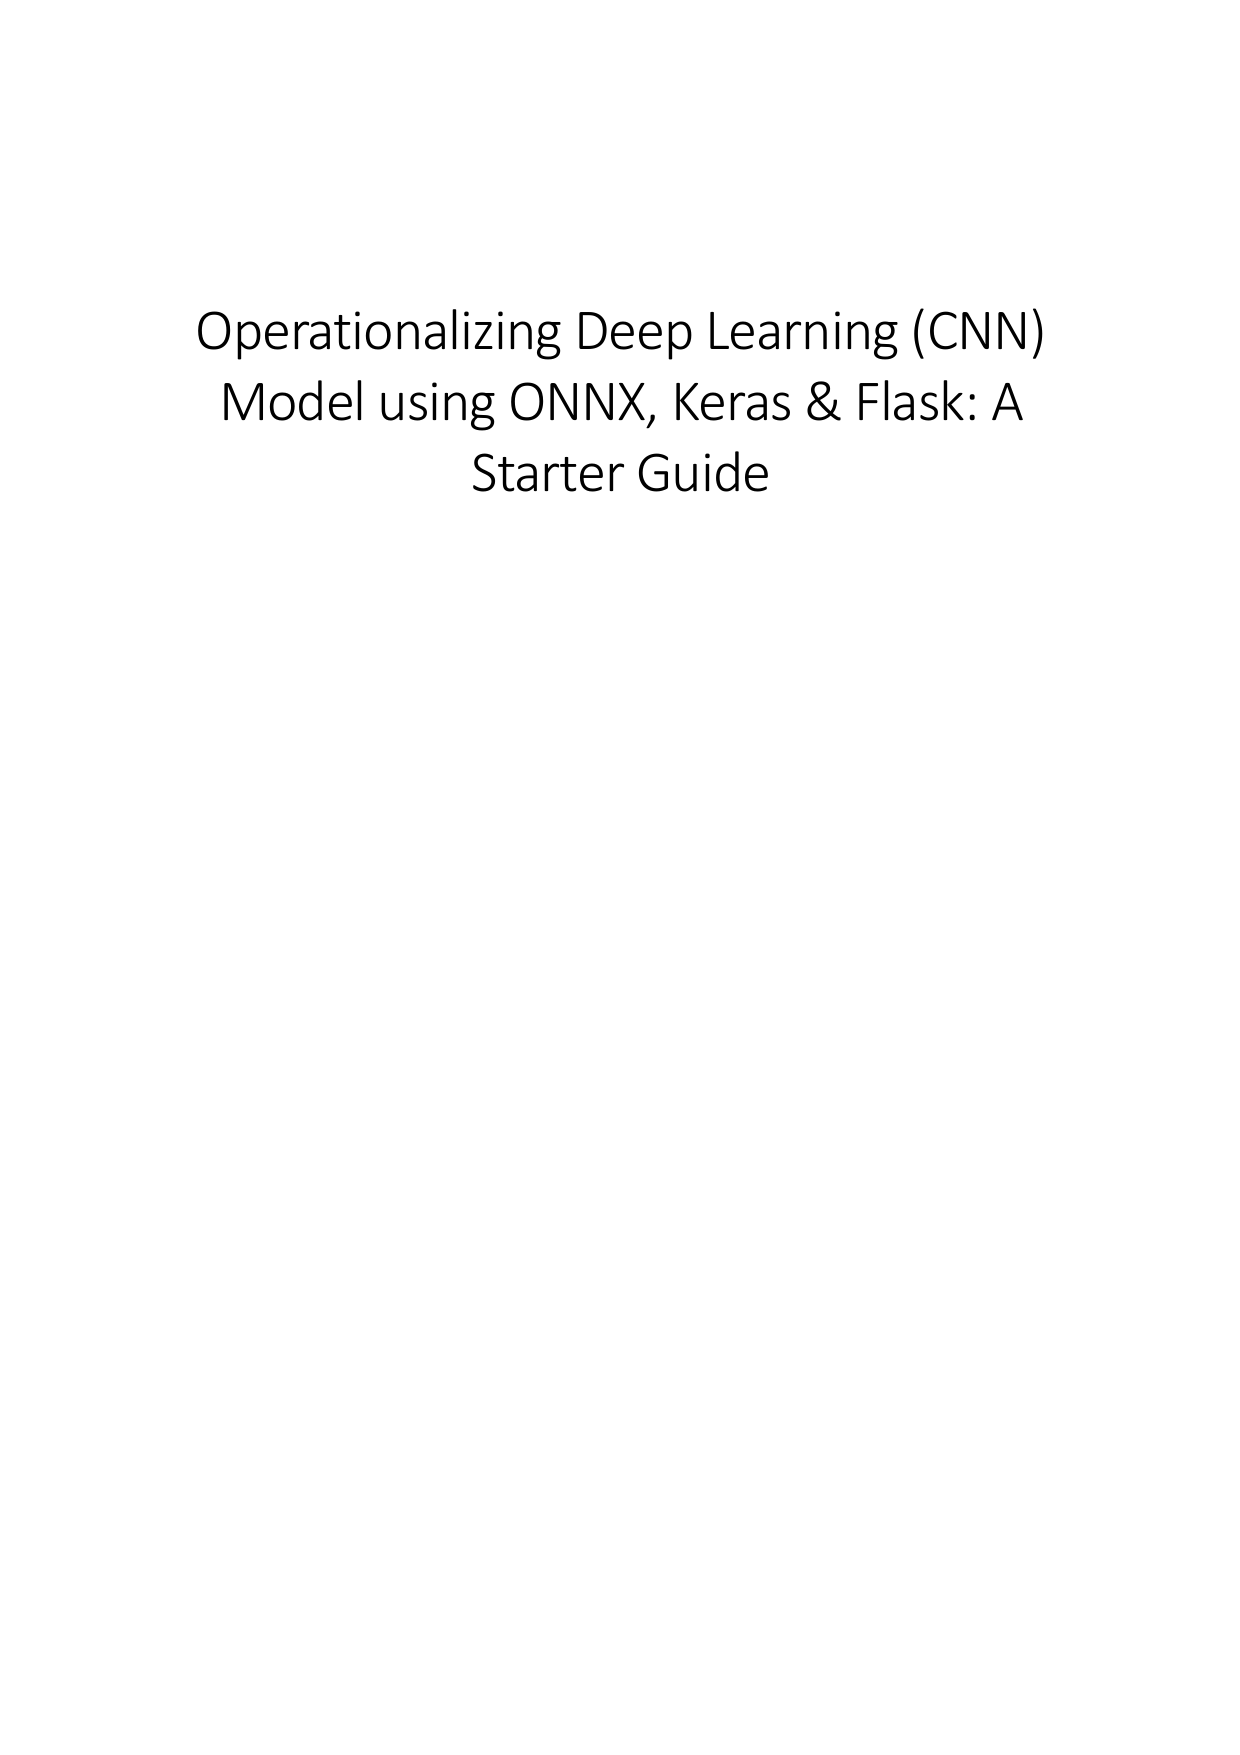 Page 1 of 9 - Operationalizing Deep Learning  - A Starter Guide